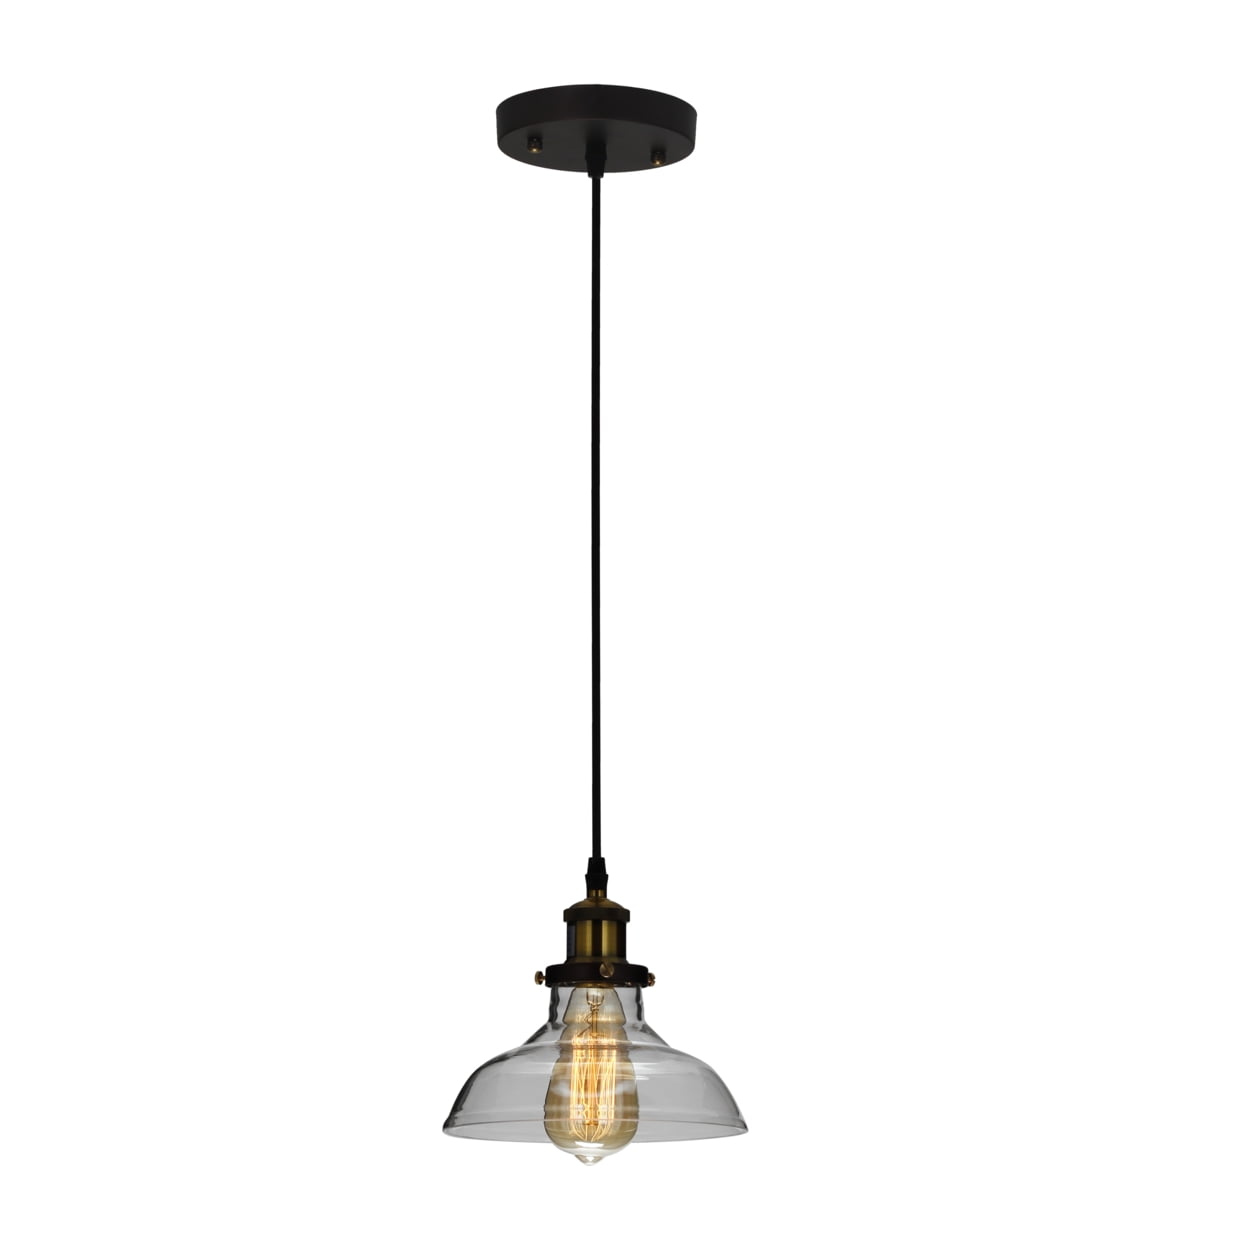 Ch6d802rb08-dp1 Cadman Industrial 1 Light Oil Rubbed Bronze Ceiling Pendant - 8 In.